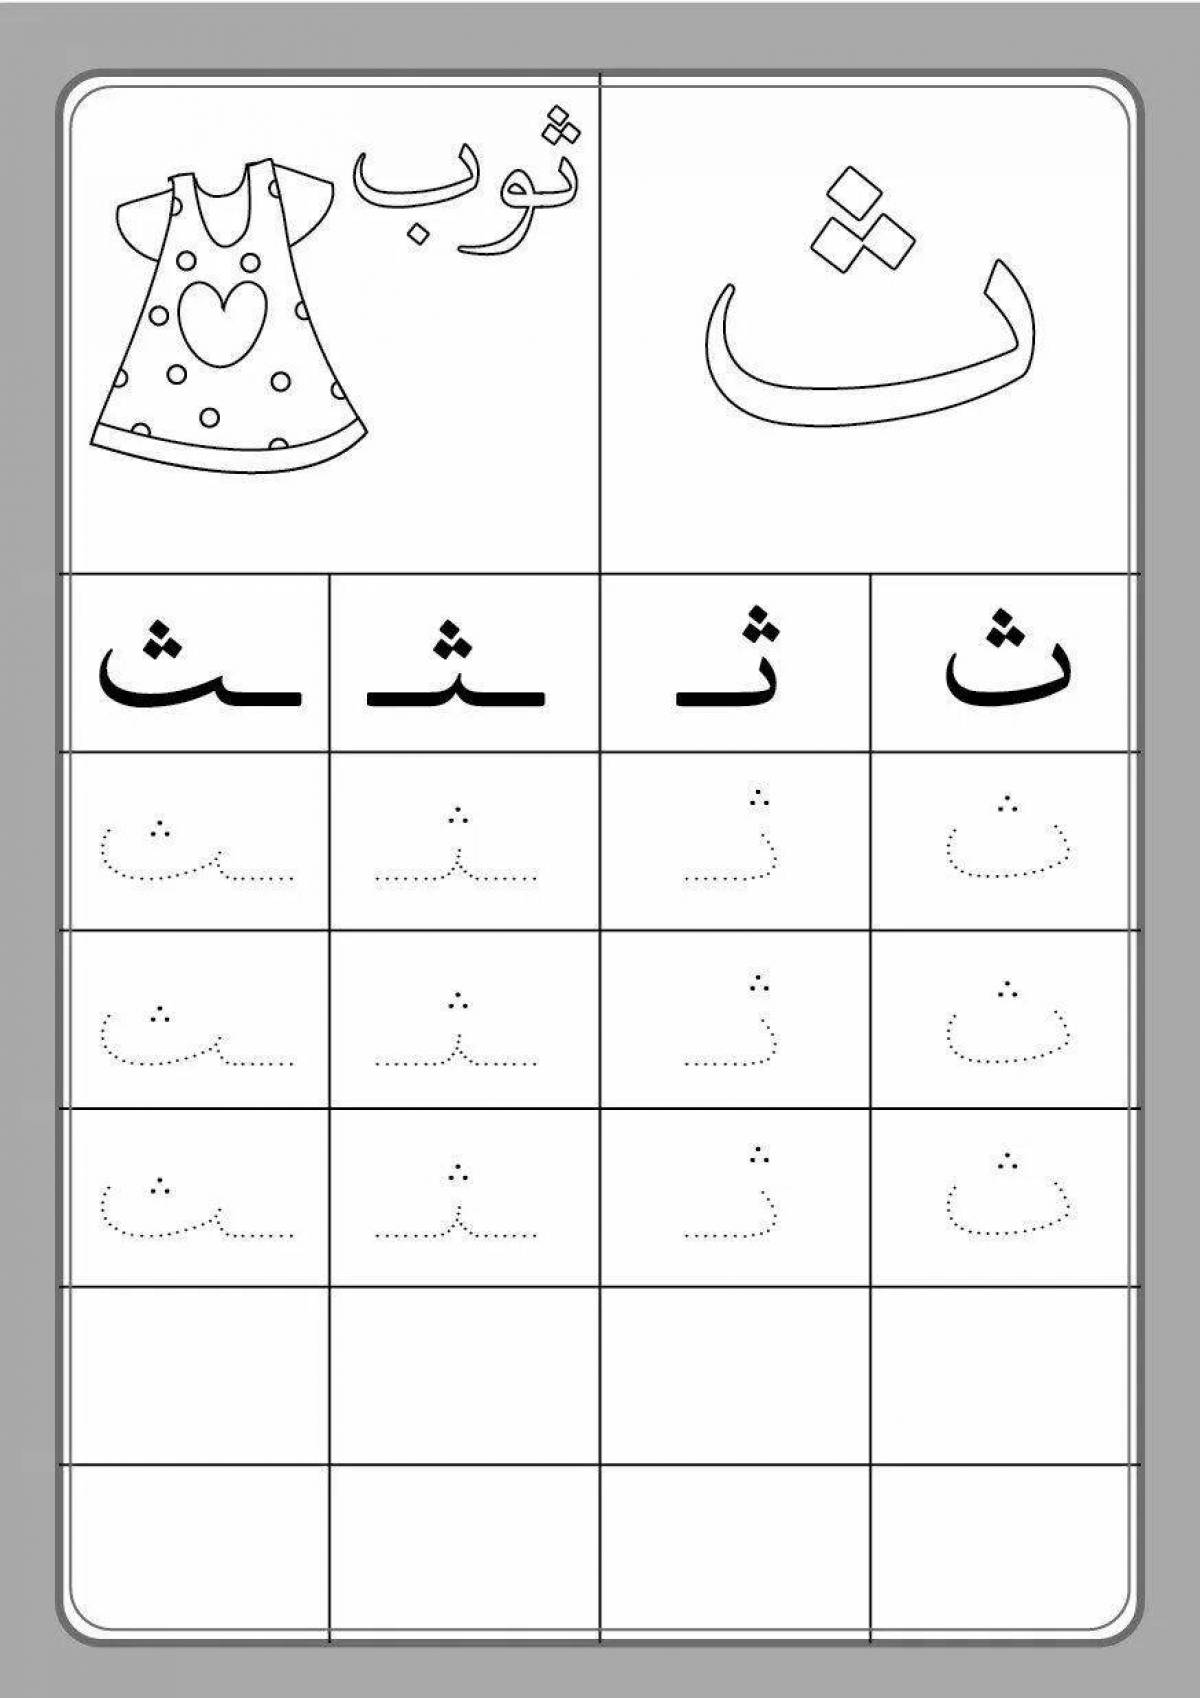 Colorful Arabic alphabet coloring page for beginners